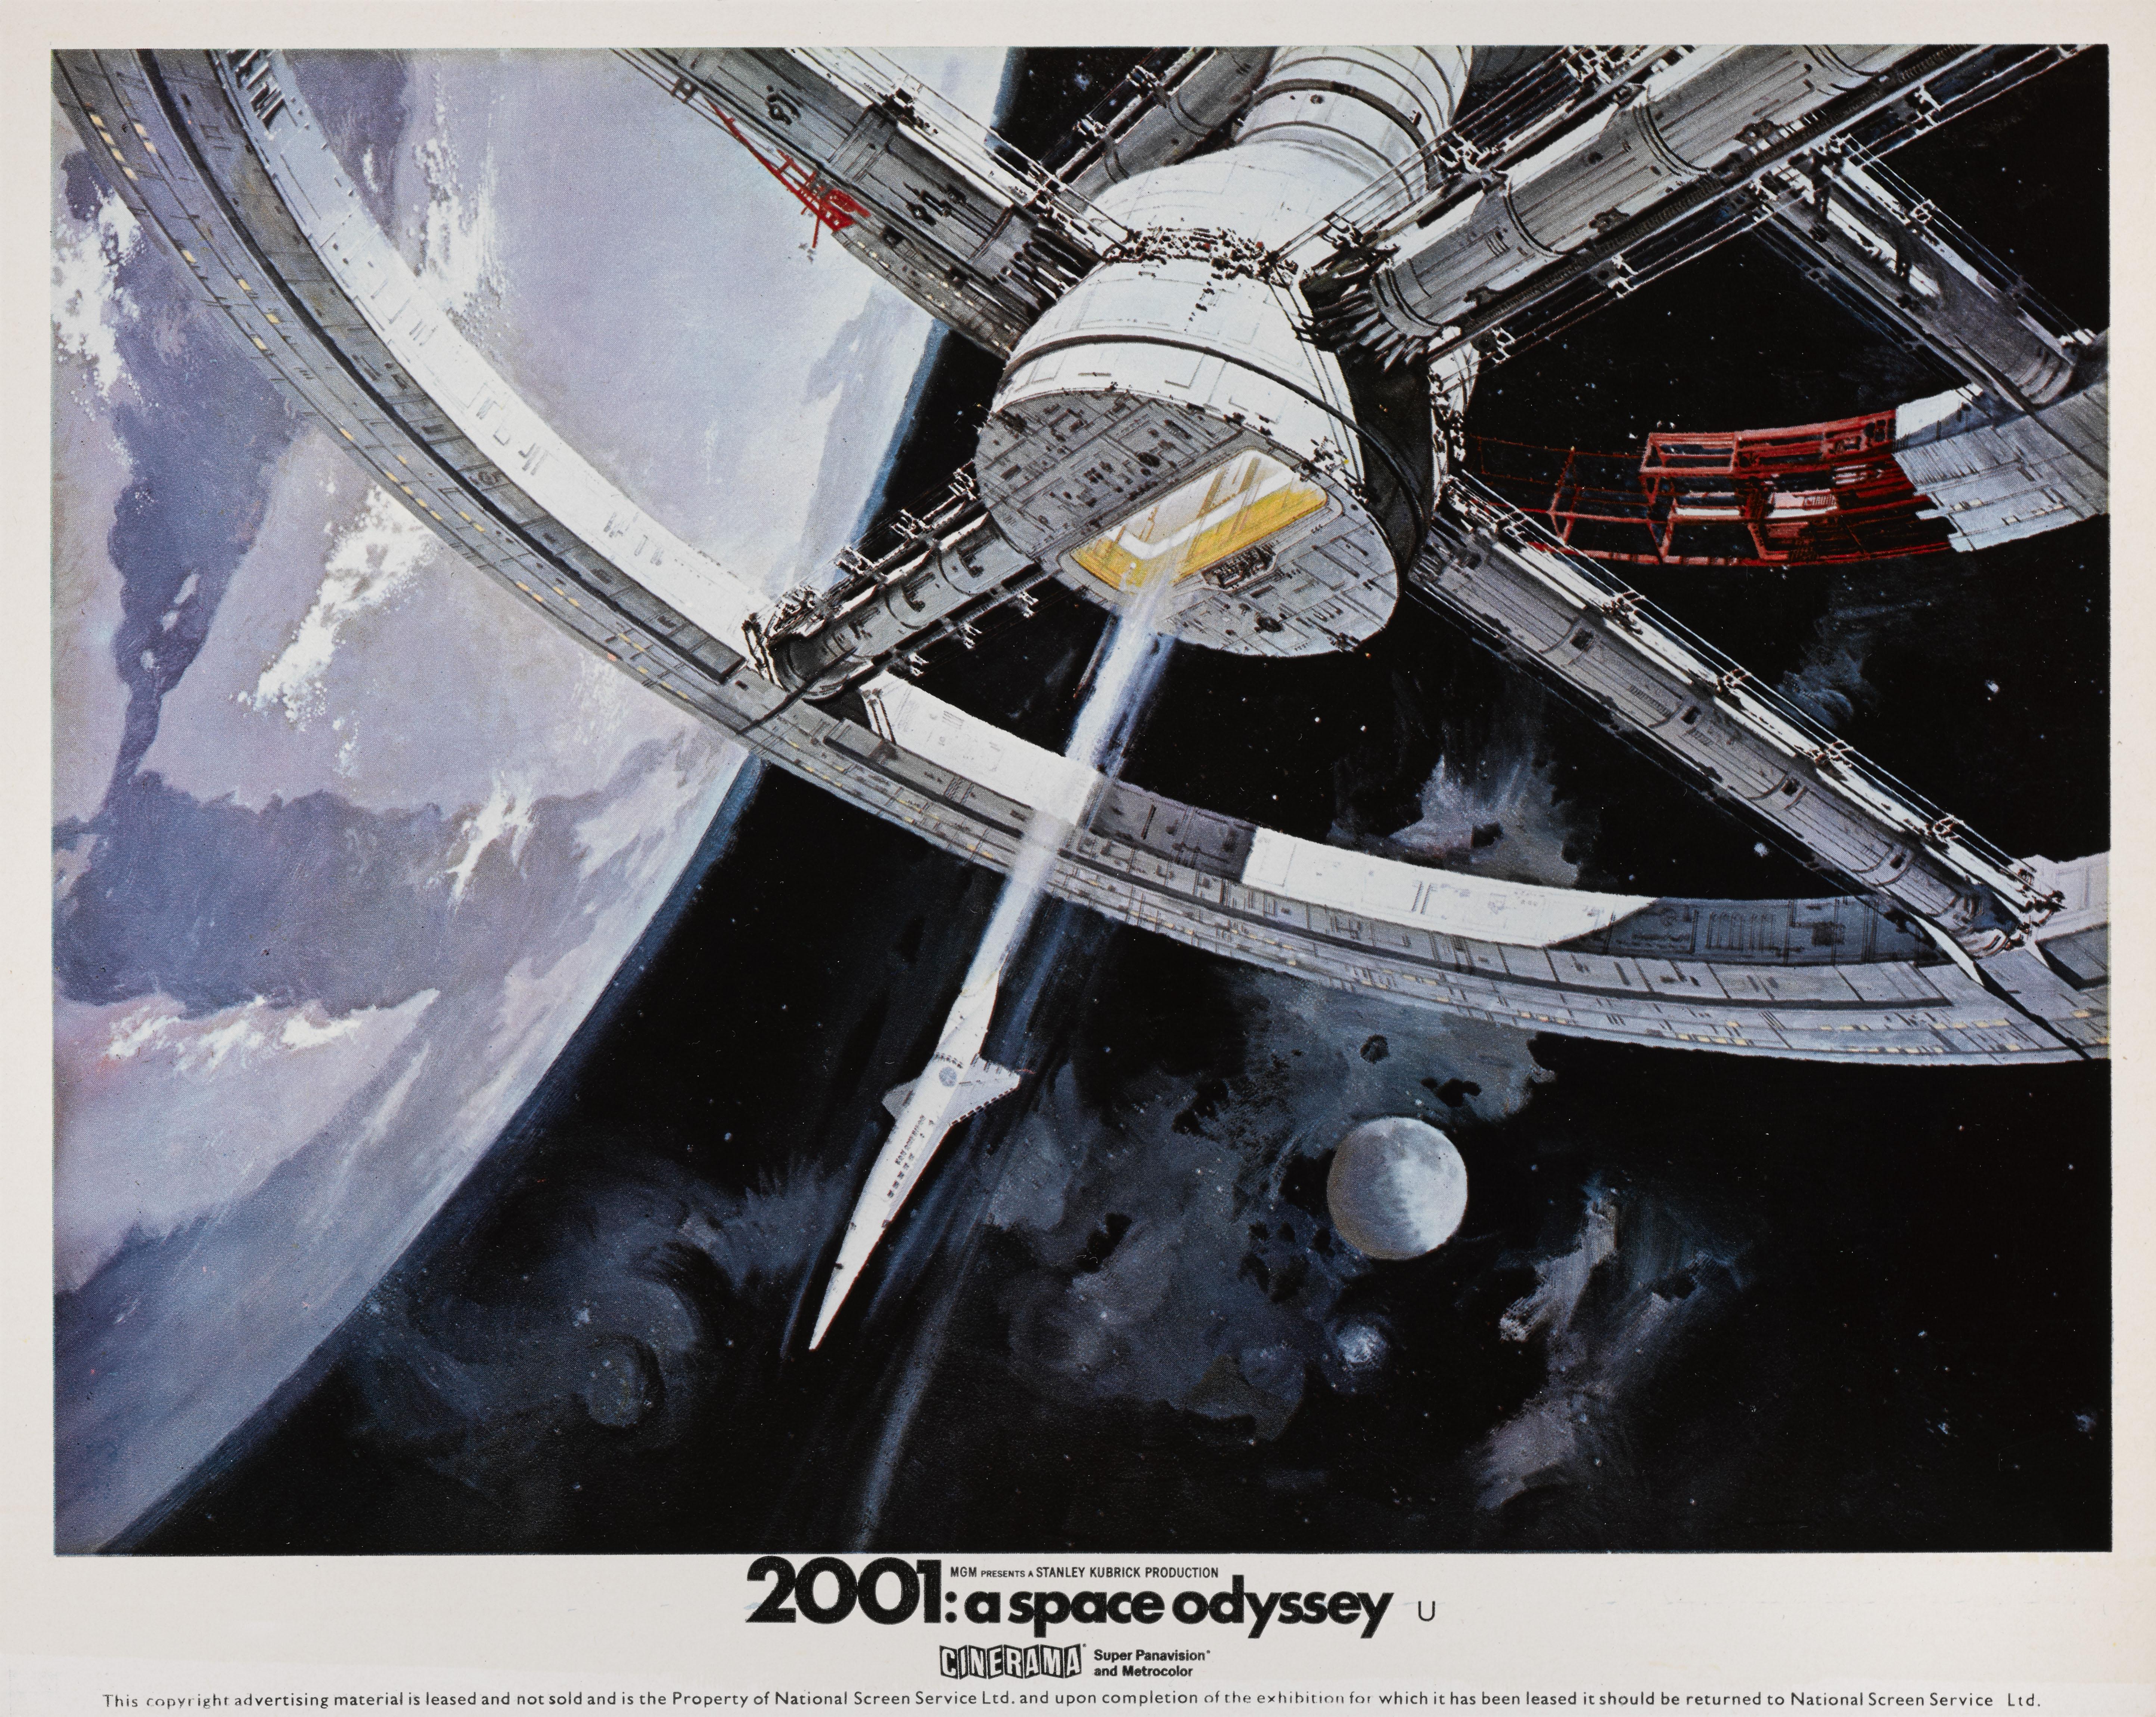 Original British colour production still for the Cinerama release of Stanley Kubrick's 2001: A Space Odyssey.
The Cinerama release stills are much harder to find and more desirable.
This piece would be packed in strong card and sent out flat.
 